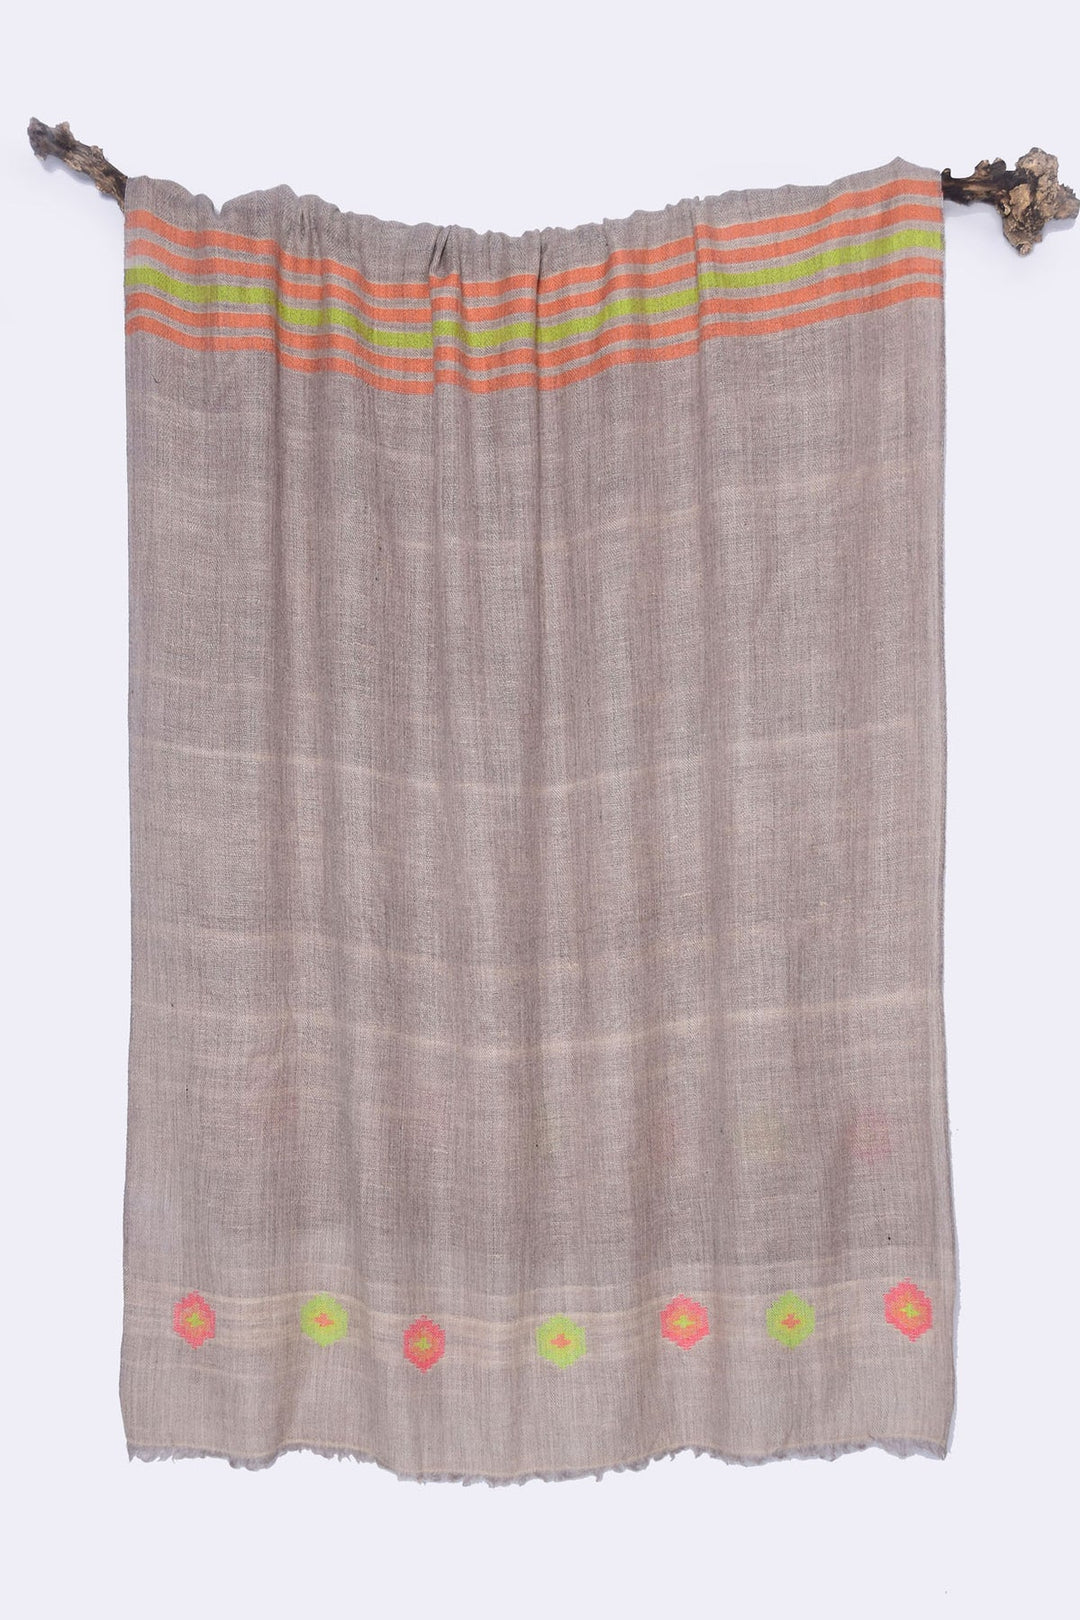 Pashmina Shawl with Twill Weave and Hand Embroidery | Hermes Handwoven Pashmina Shawl - Brown